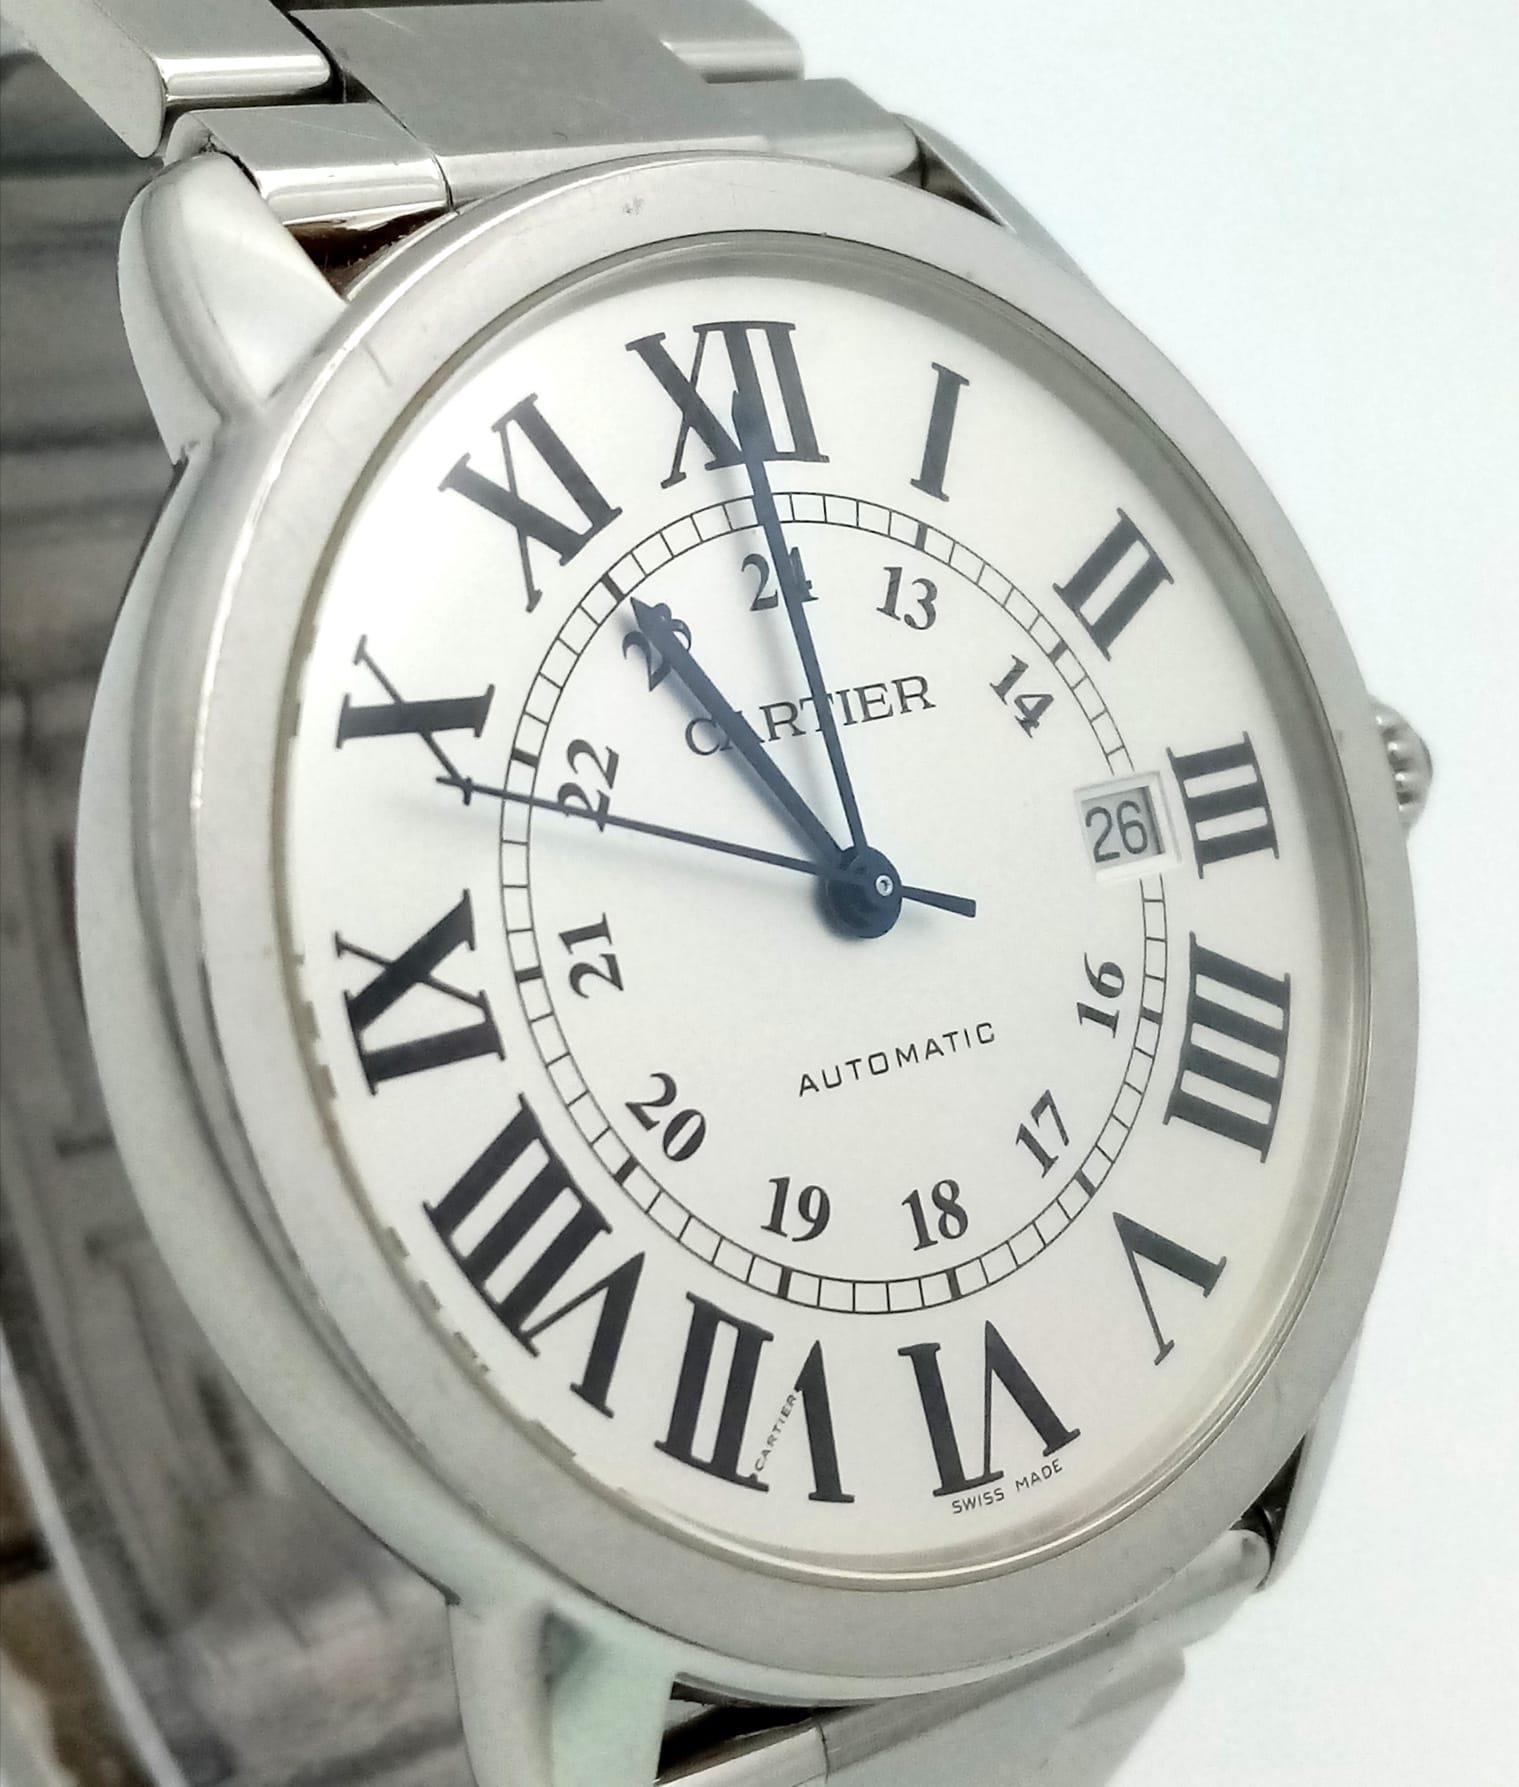 A CARTIER STAINLESS STEEL GENTS AUTOMATIC "RONDE SOLO" WATCH WITH BOX AND PAPERS 42mm 14808 - Image 3 of 10